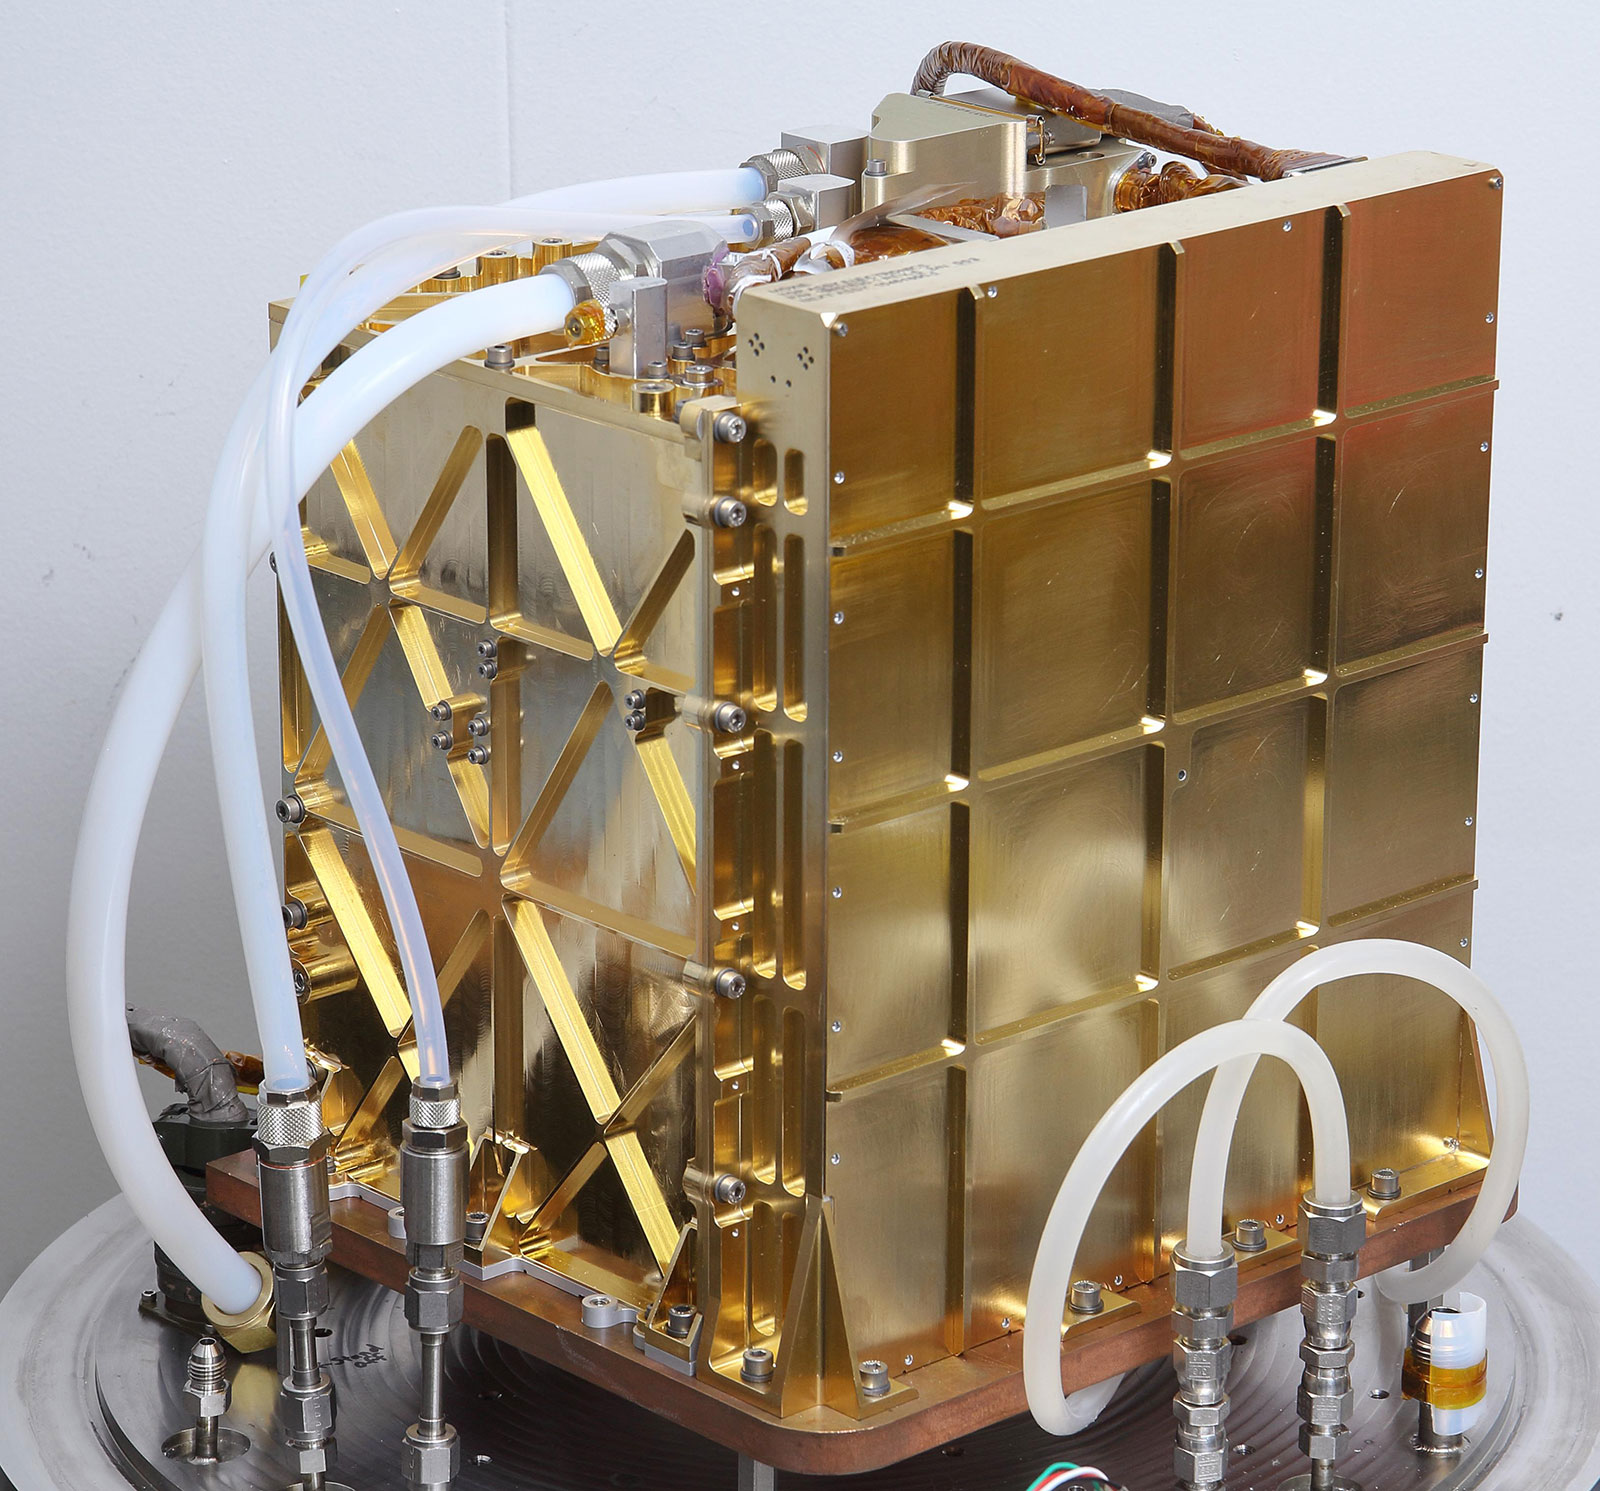 The engineering model (EM), an almost identical twin of MOXIE, is used for testing in the lab at NASA's Jet Propulsion Laboratory in Pasadena, California.